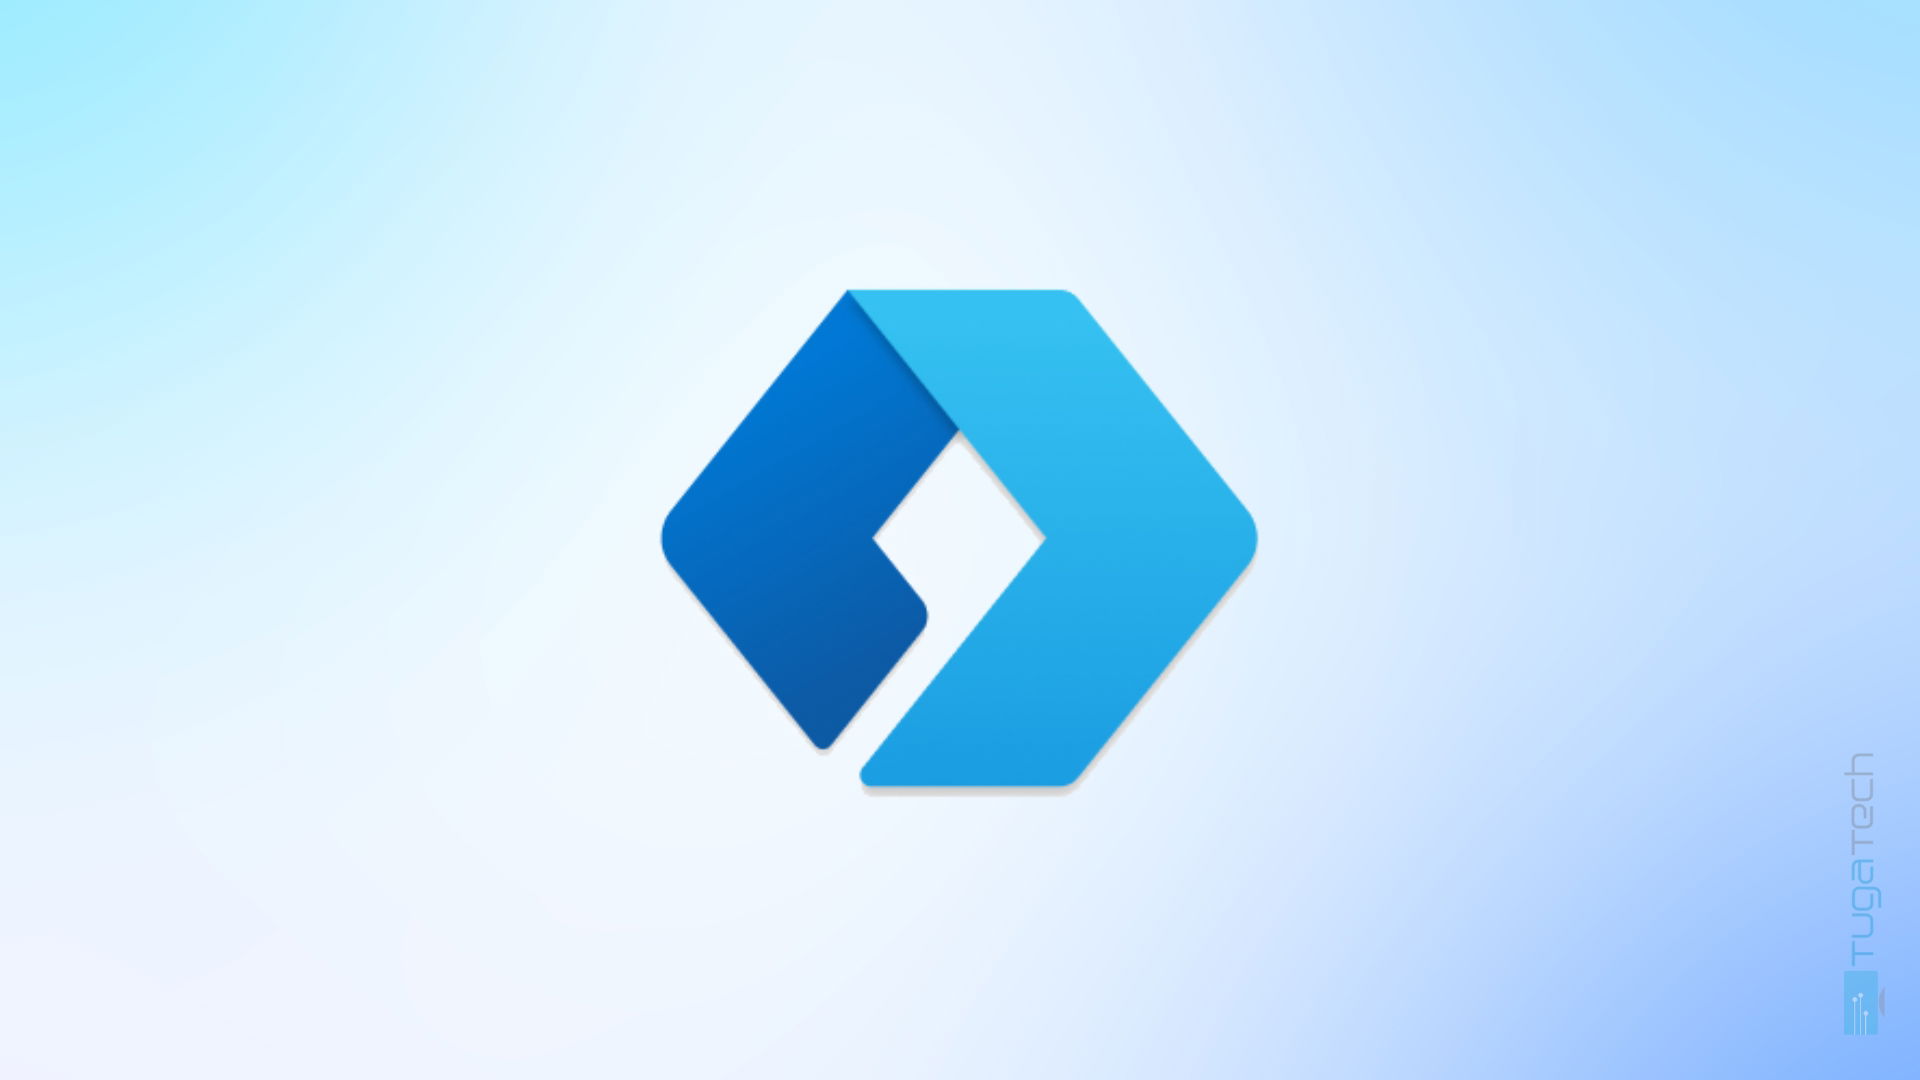 Microsoft Launcher do Android logo